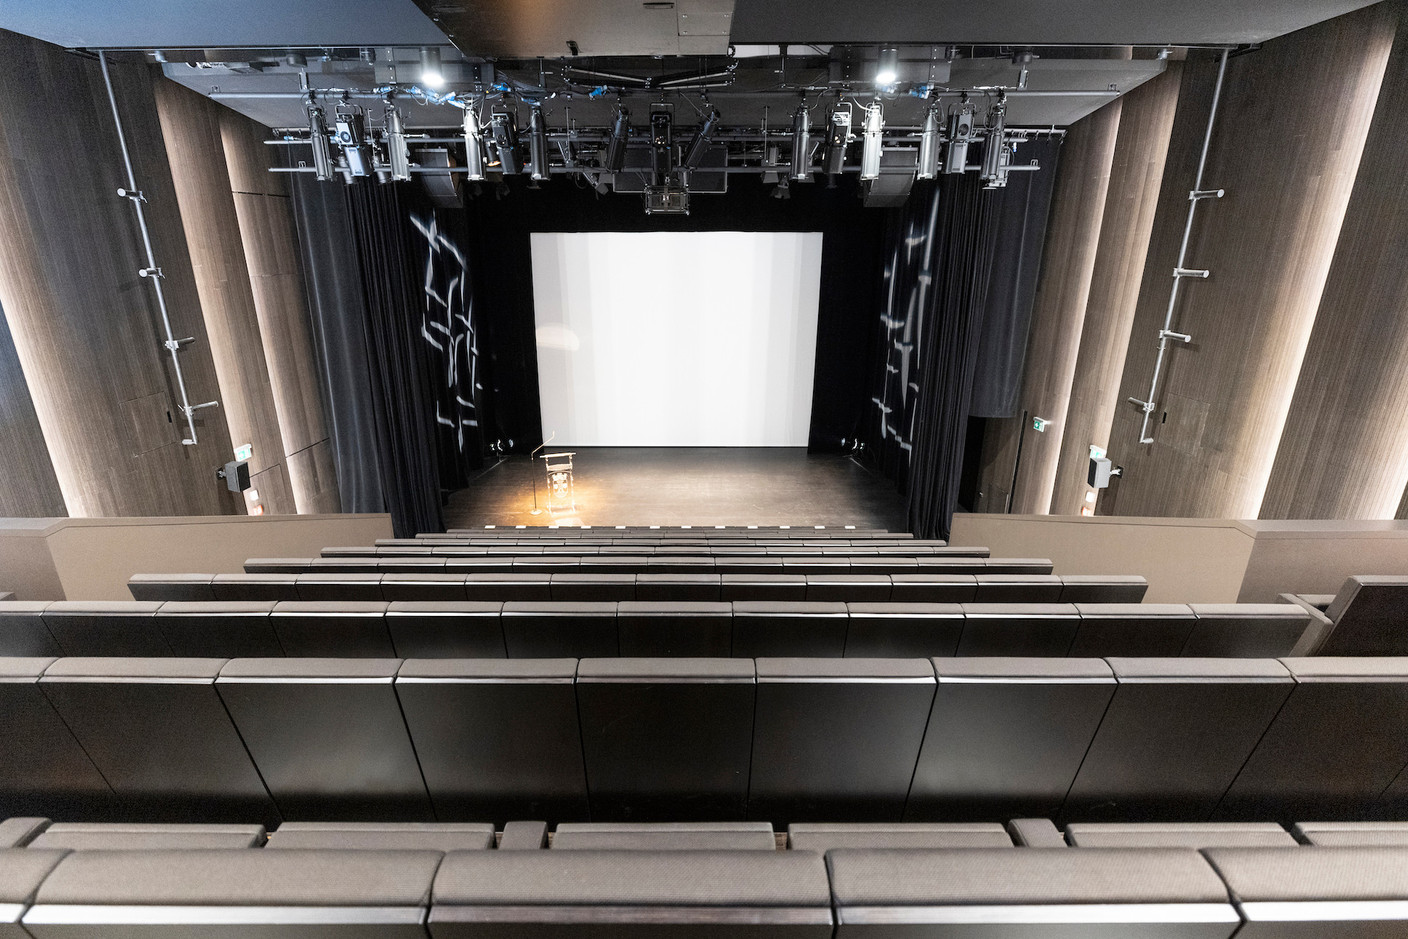 The cinema has been converted into a performance space. Photo: Guy Wolff/Maison Moderne